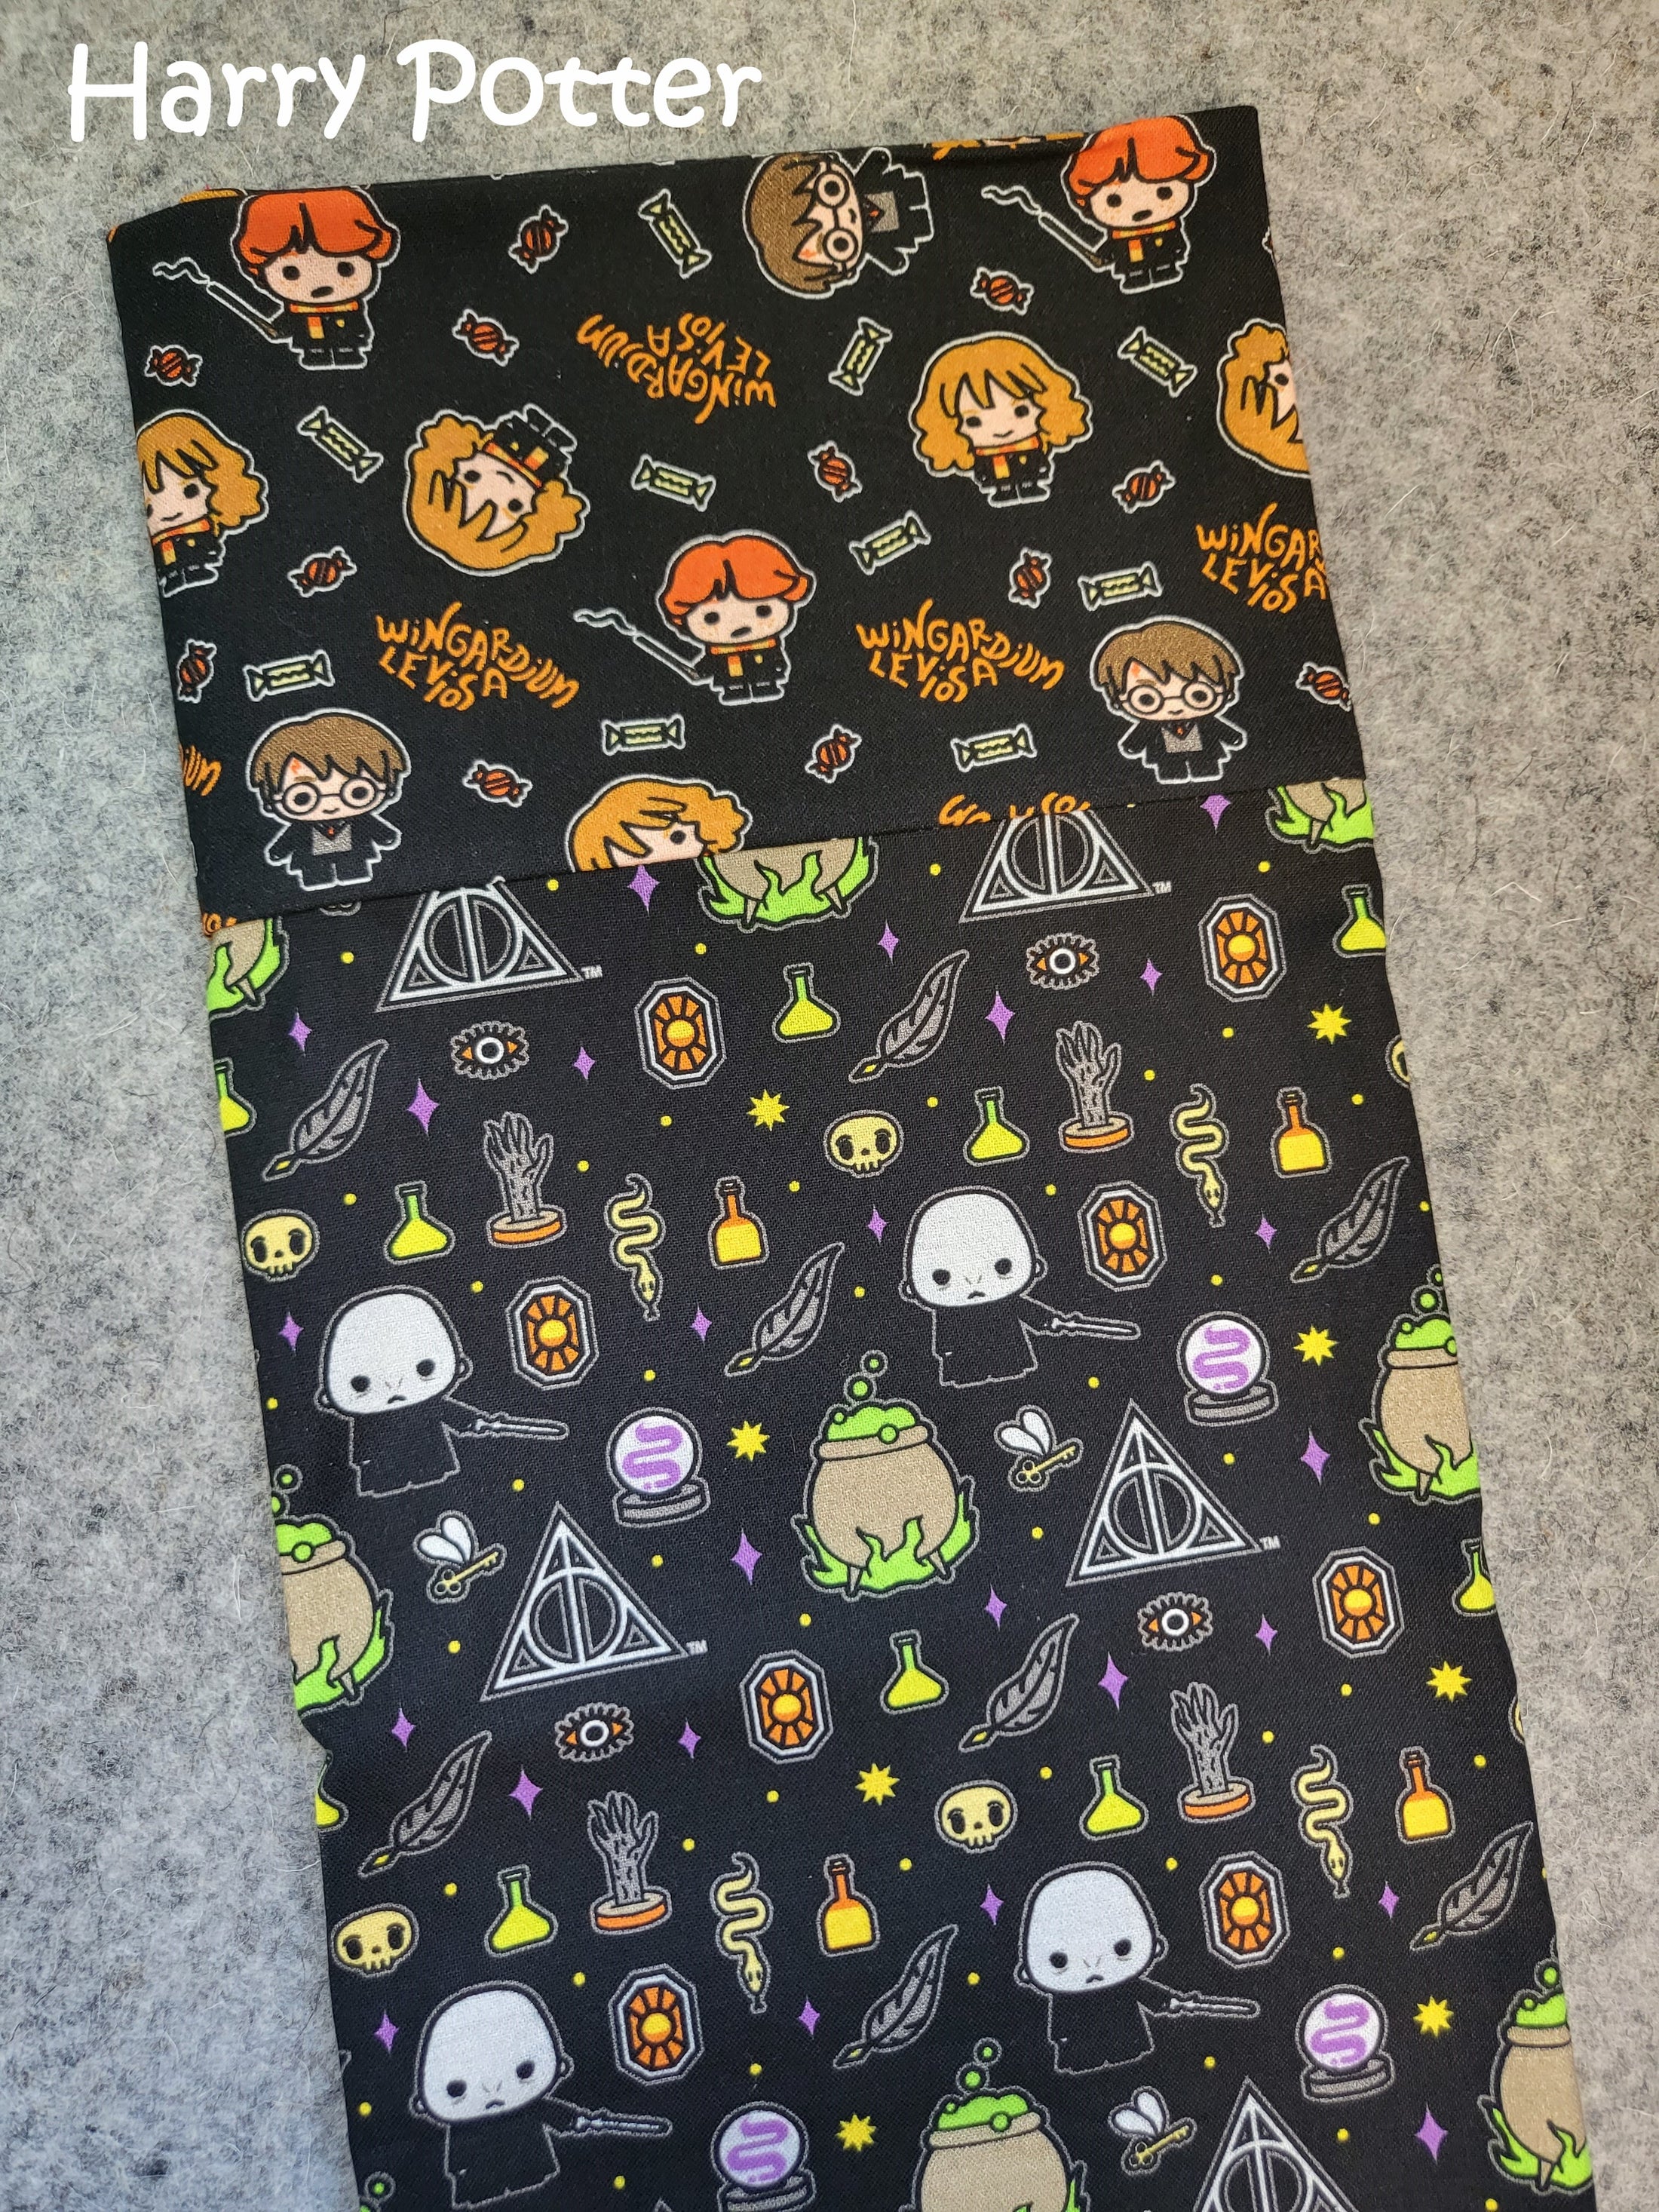 Harry potter halloween pillowcase for trick-or-treating.